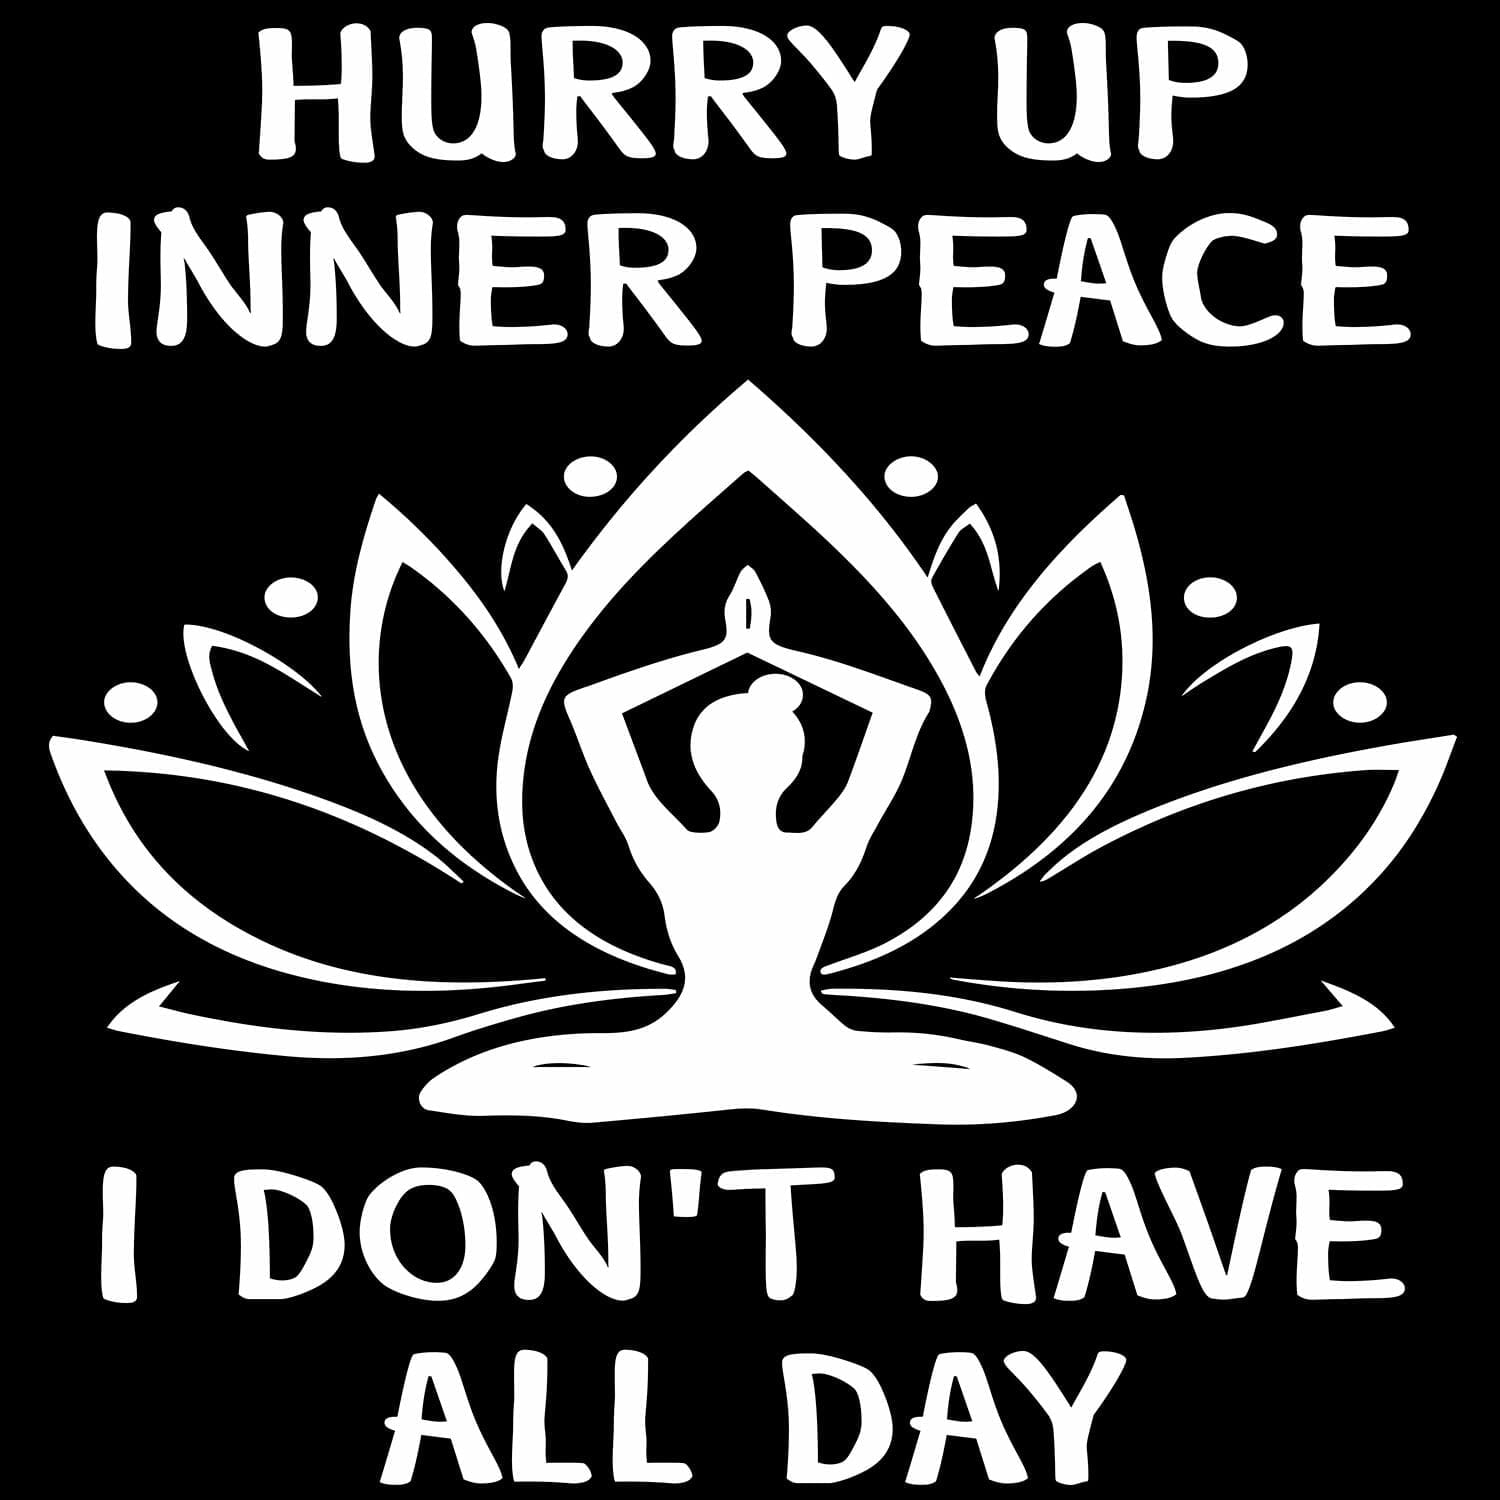 Hurry up inner peace I don't have all day funny yoga tshirt design